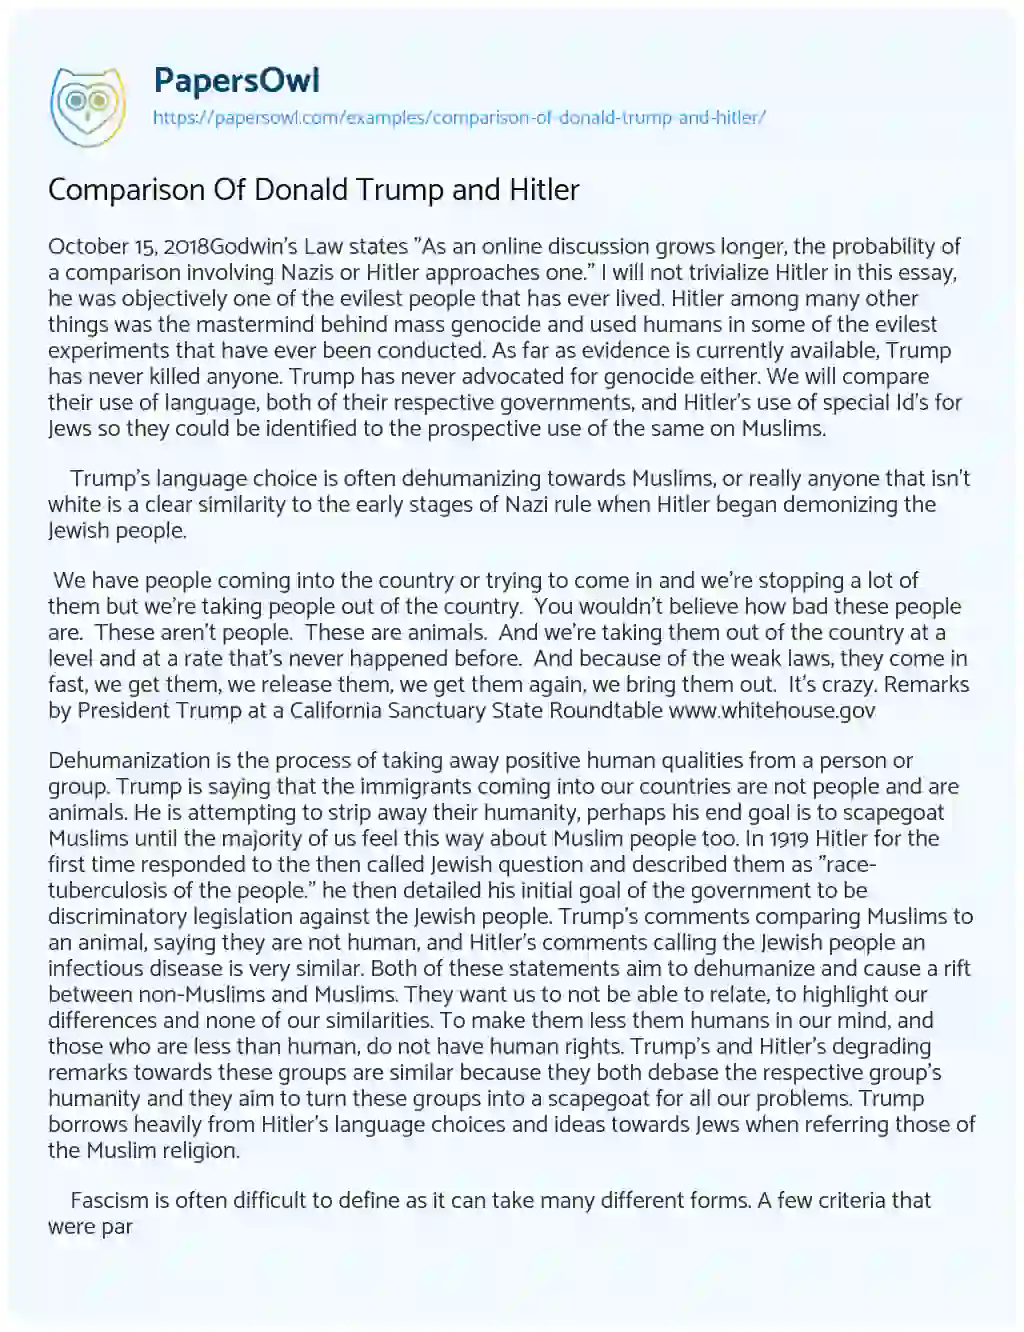 Essay on Comparison of Donald Trump and Hitler